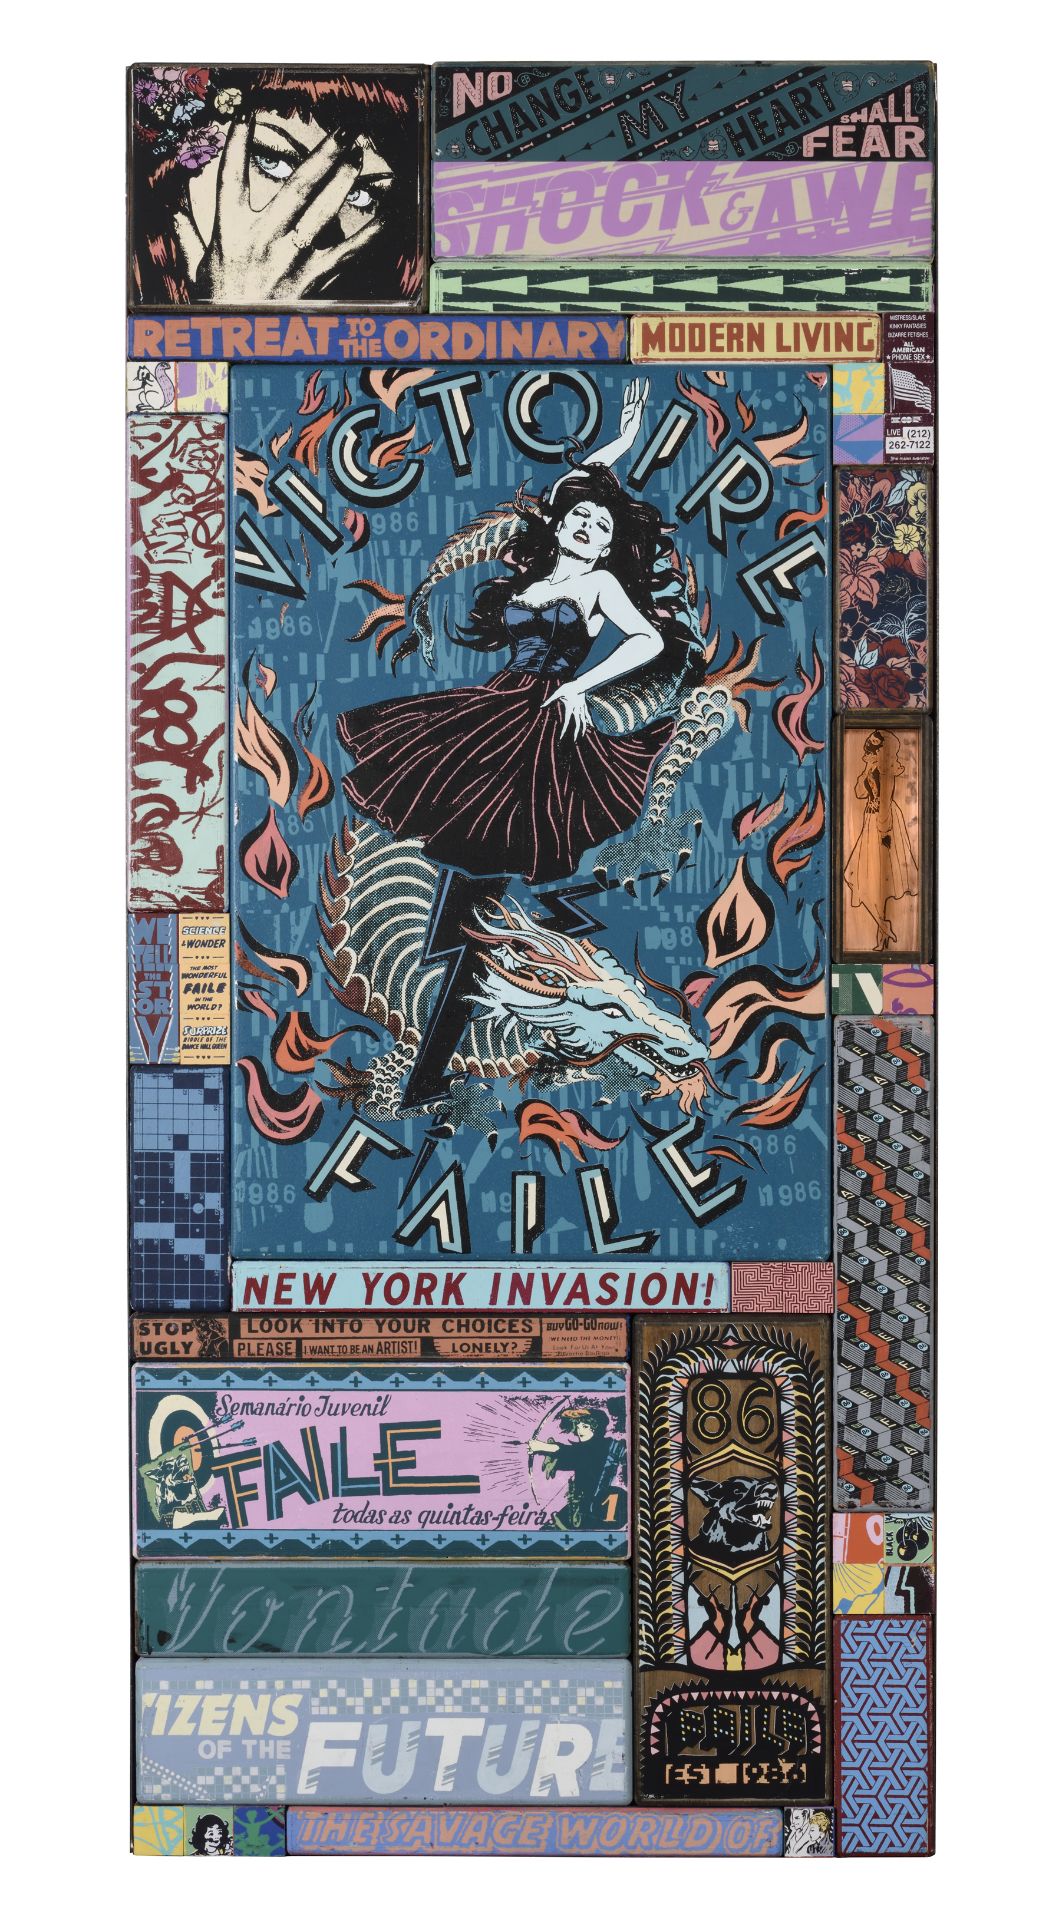 FAILE (Americans, collective founded in 1999)